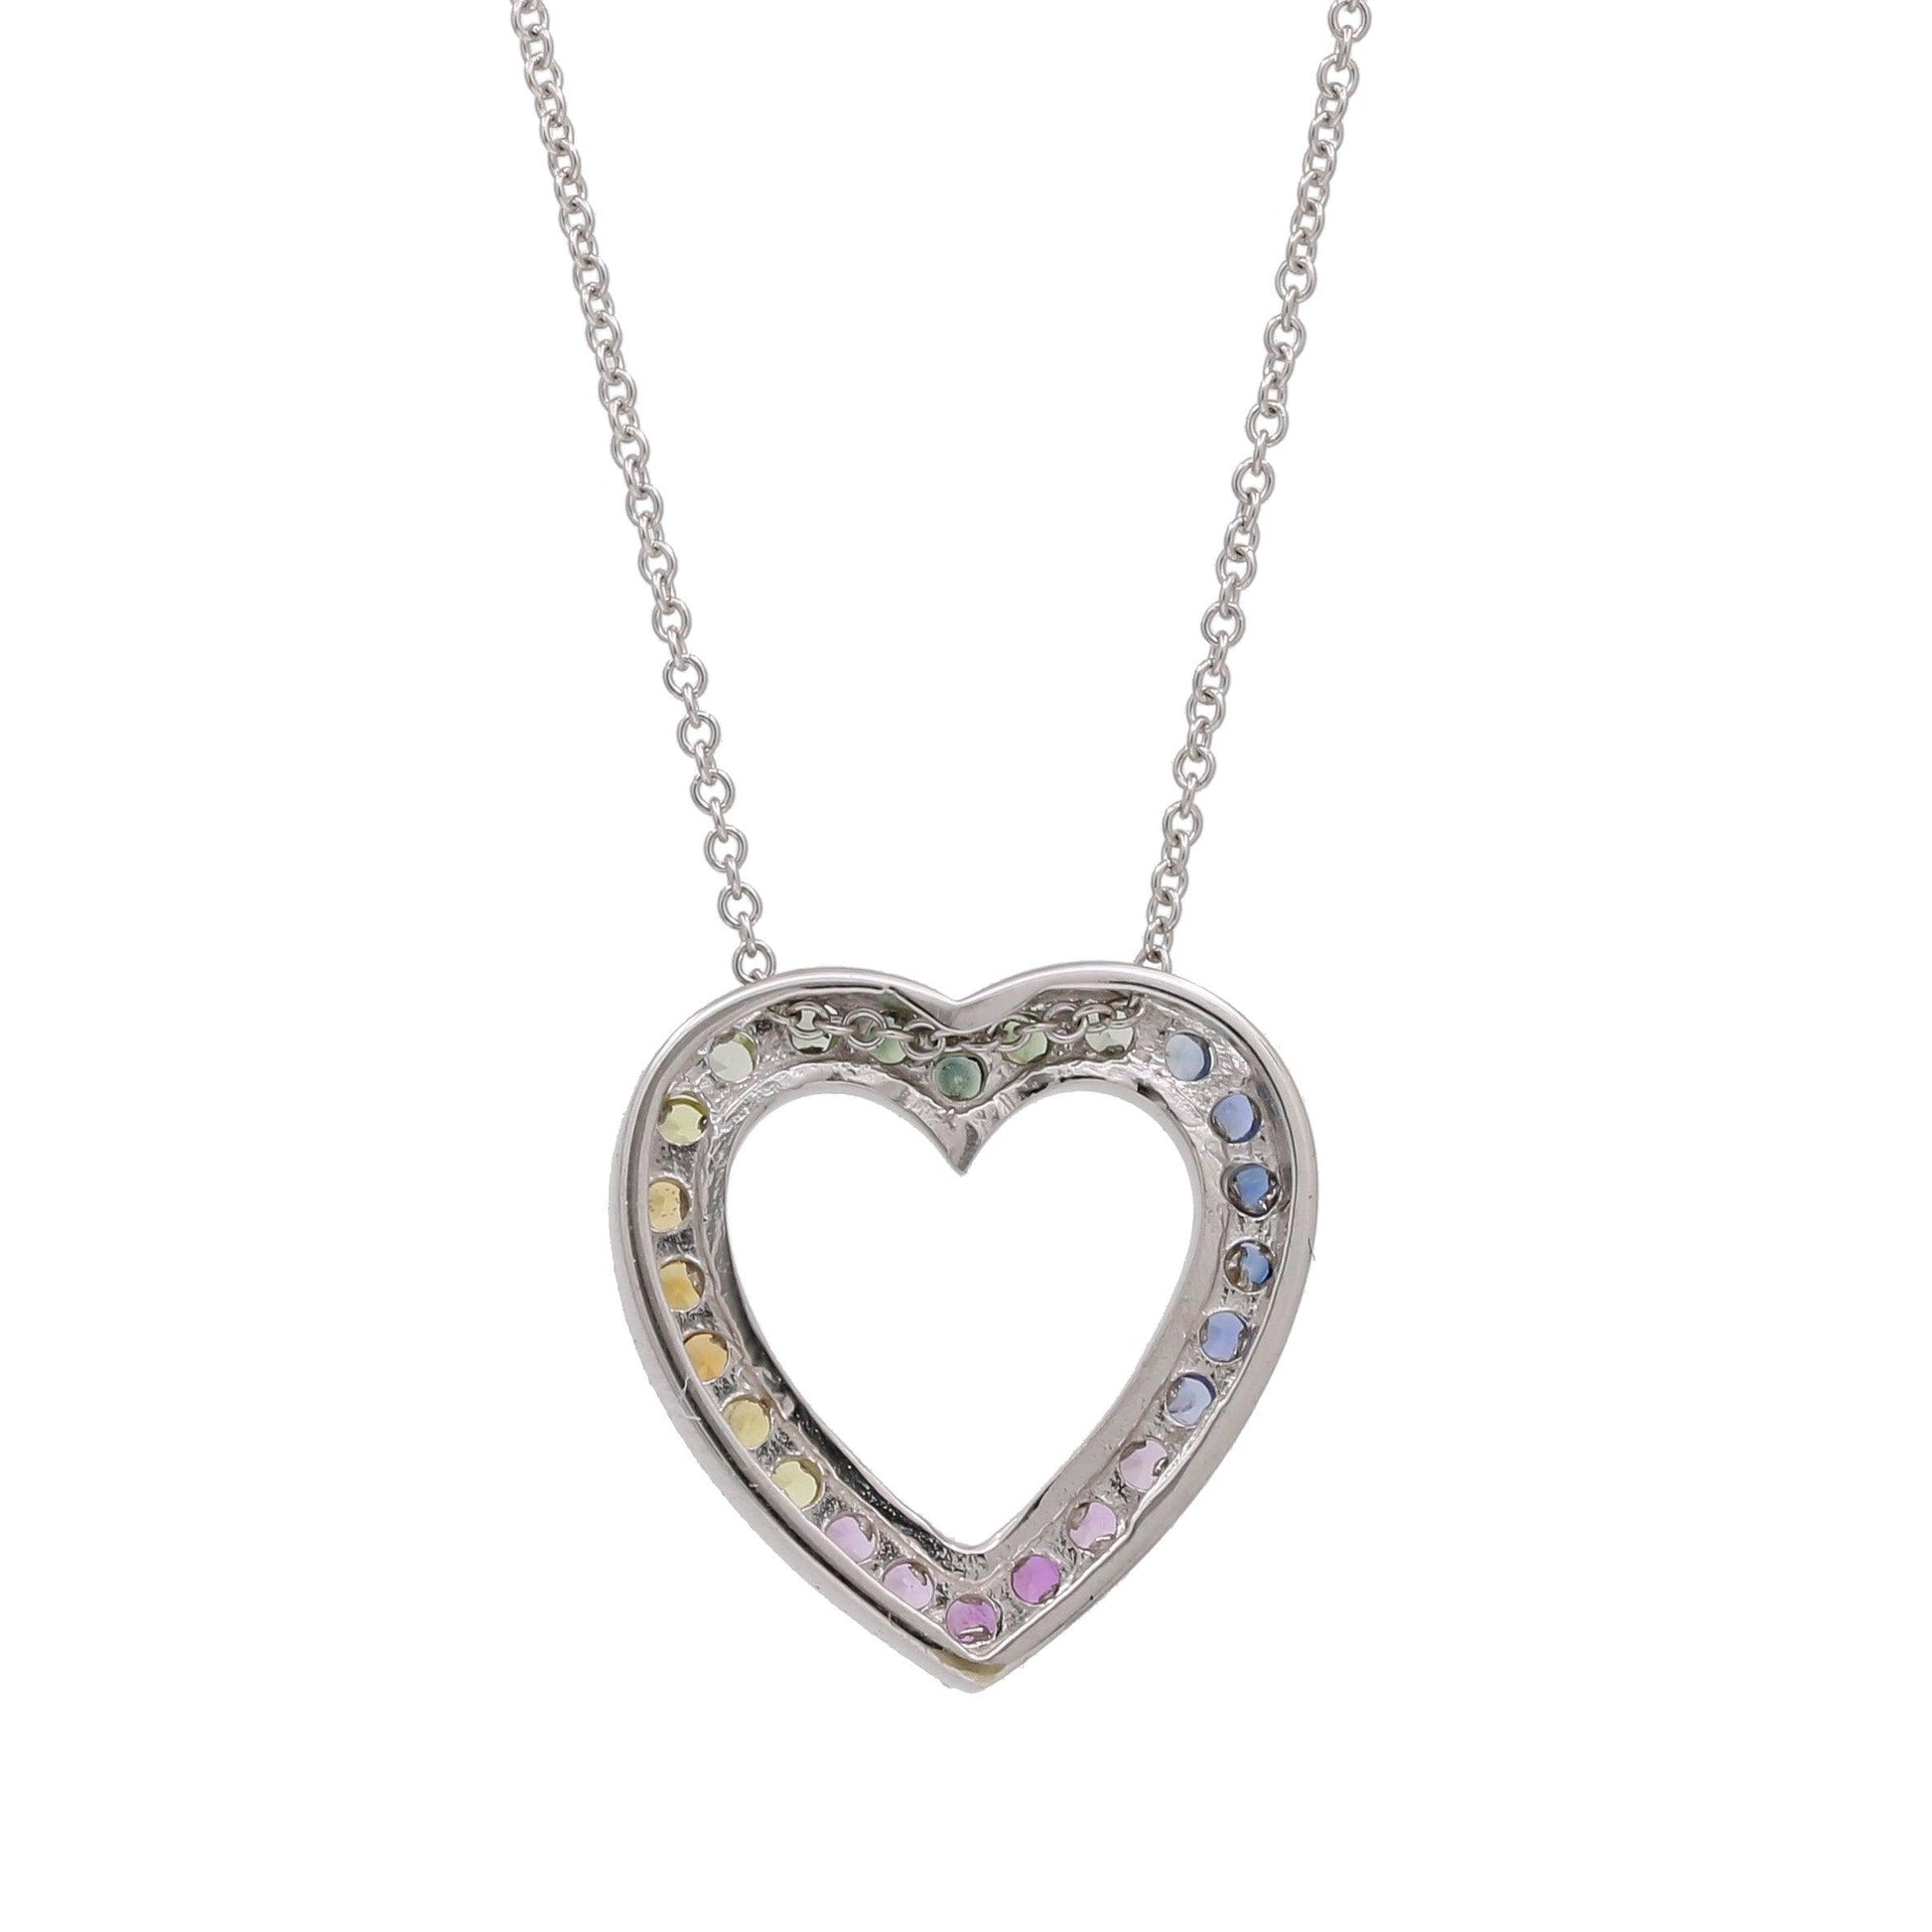 Women's Rainbow Sapphire Heart Pendant Necklace in 14k White Gold - 31 Jewels Inc.